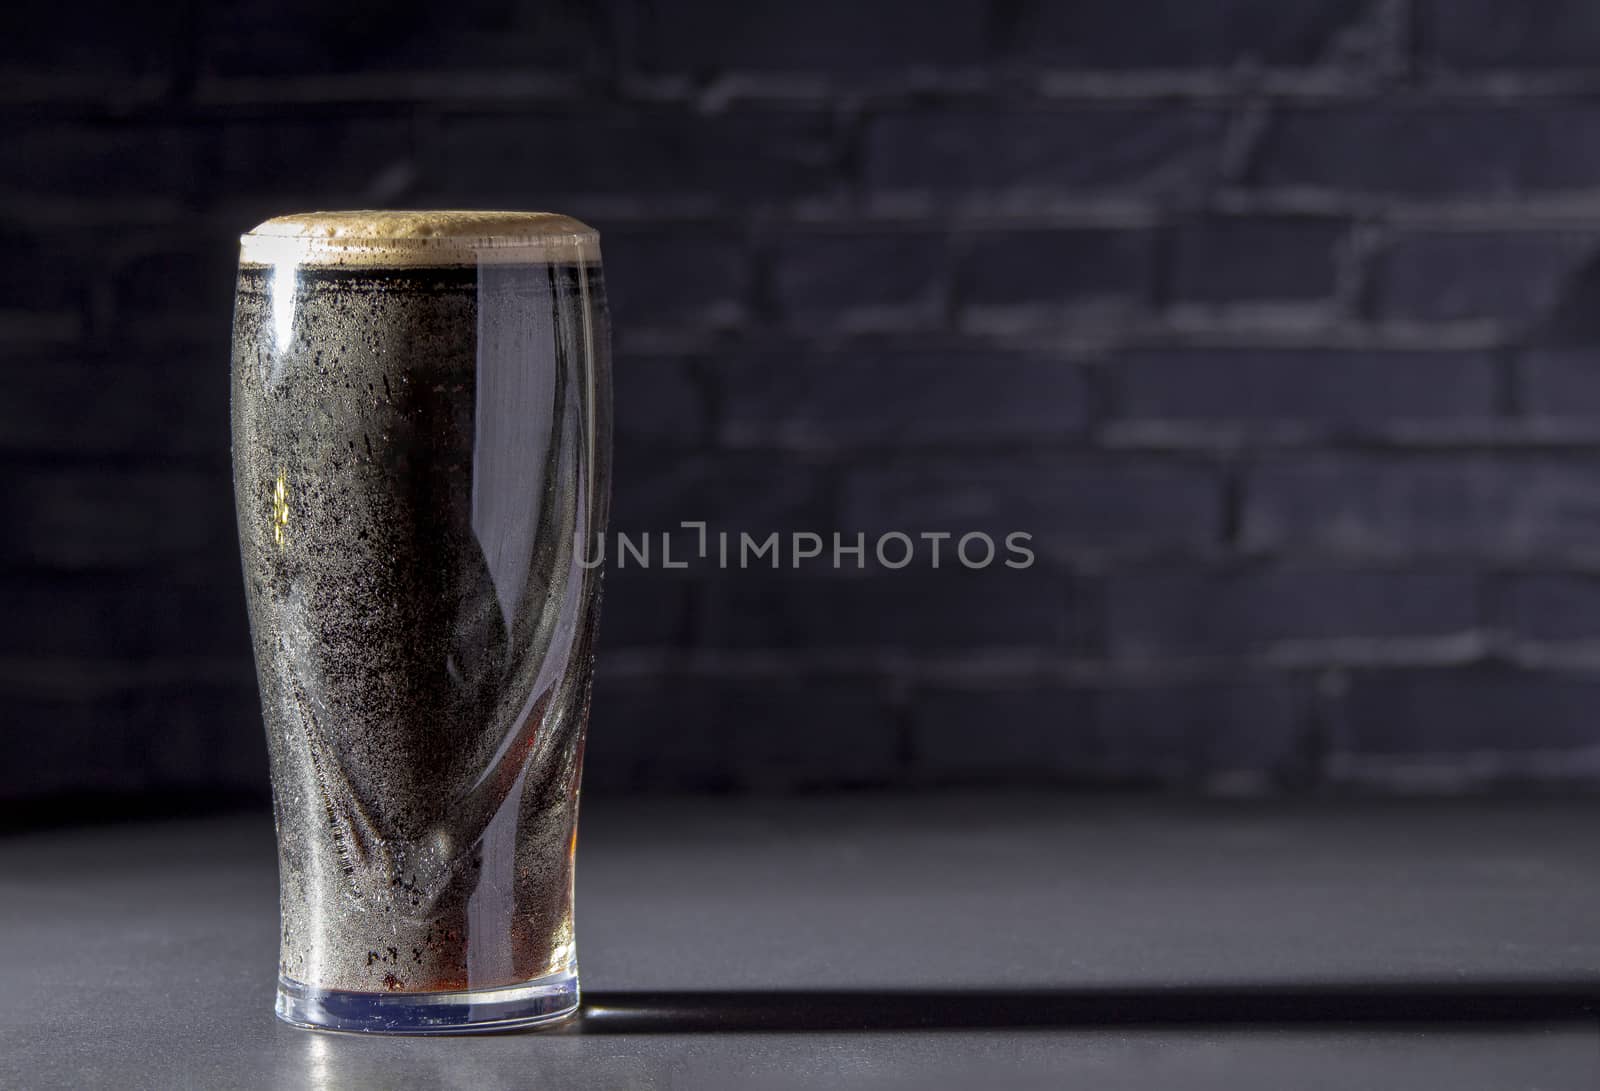 A dark Irish dry stout beer glass with a black brick on the background by oasisamuel